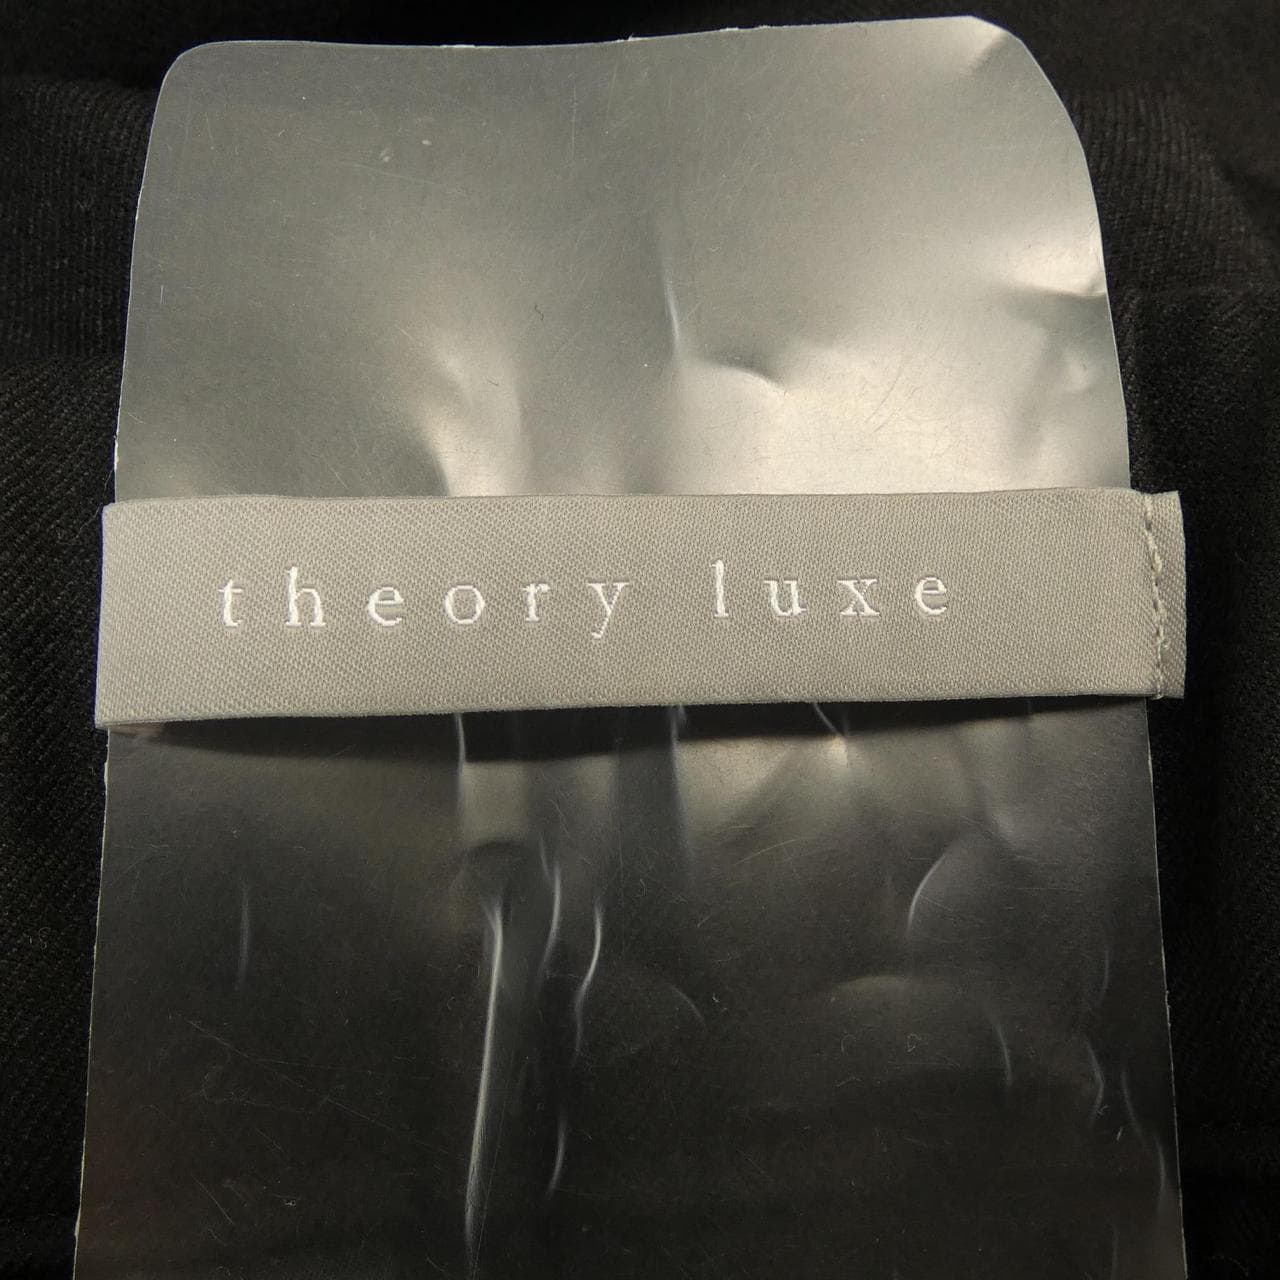 Theory luxe pants